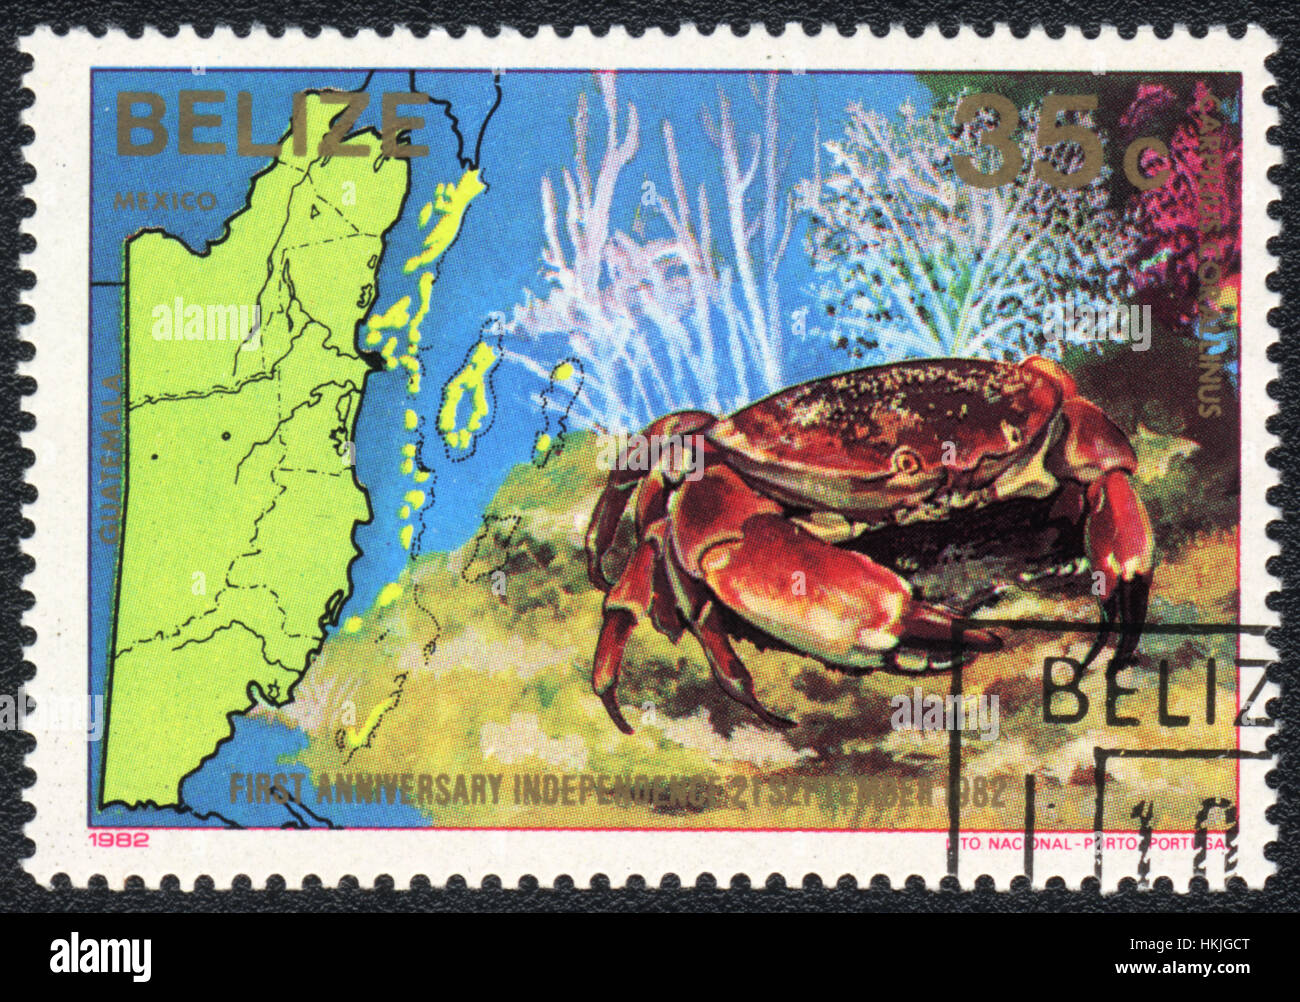 A postage stamp printed in Belize    shows a Crab (Carpilius corallinus),  series First anniversary independence 21 september 1982 Stock Photo